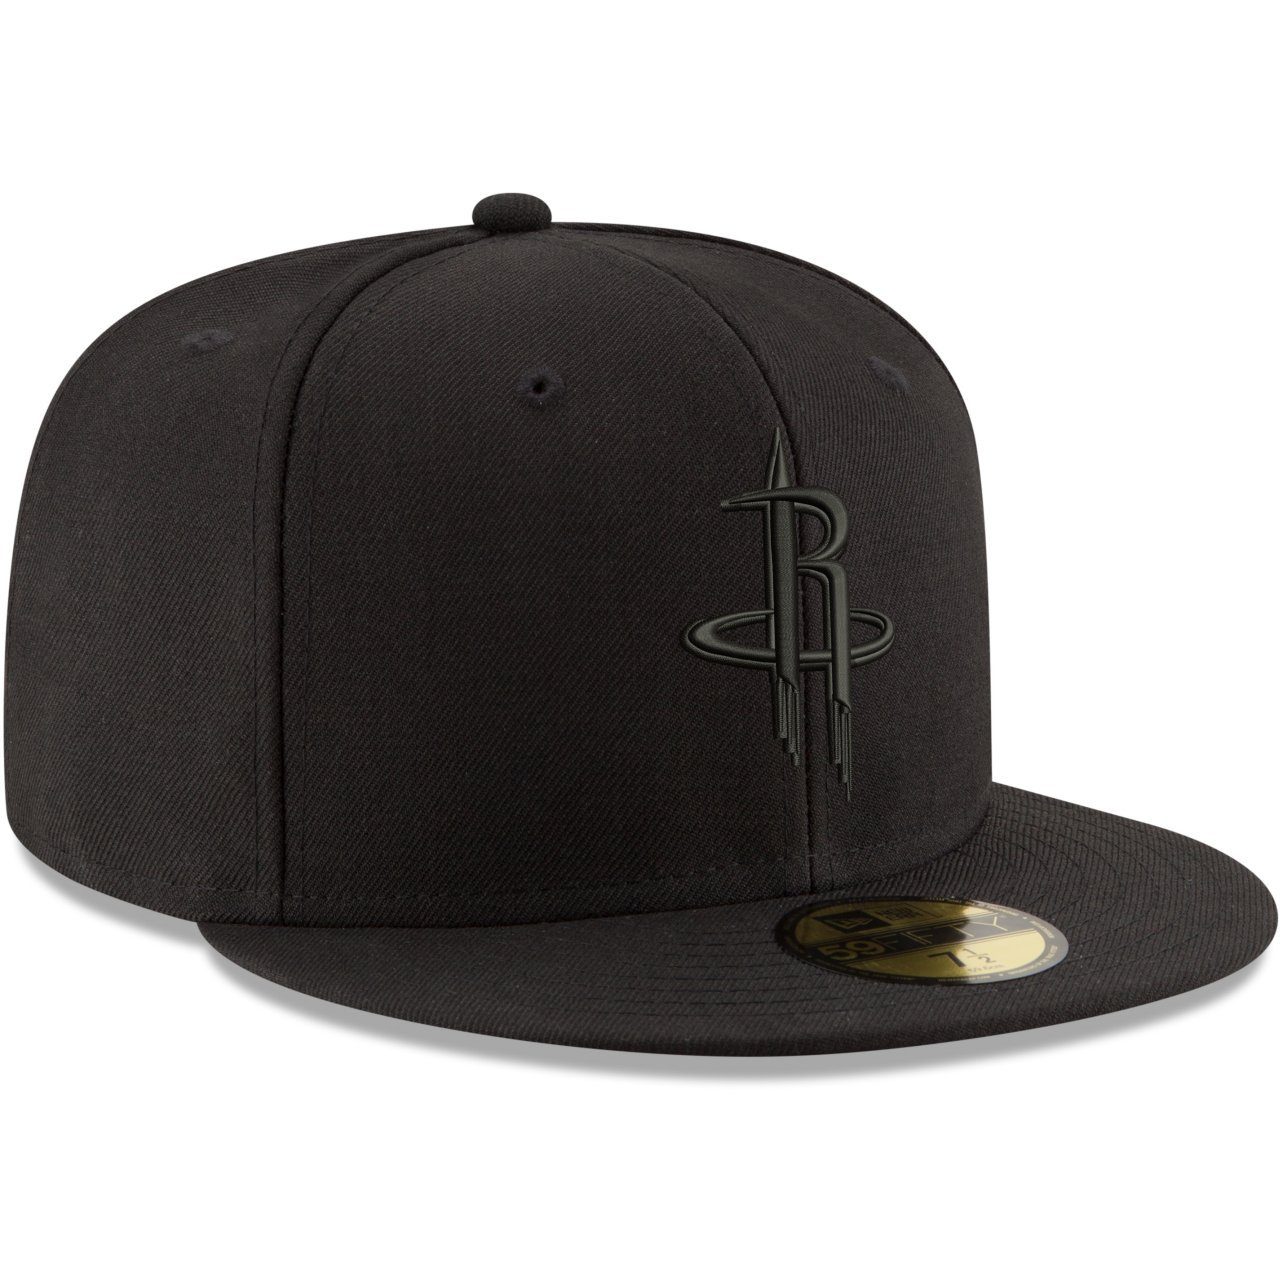 New Cap Rockets Era Houston Fitted 59Fifty NBA